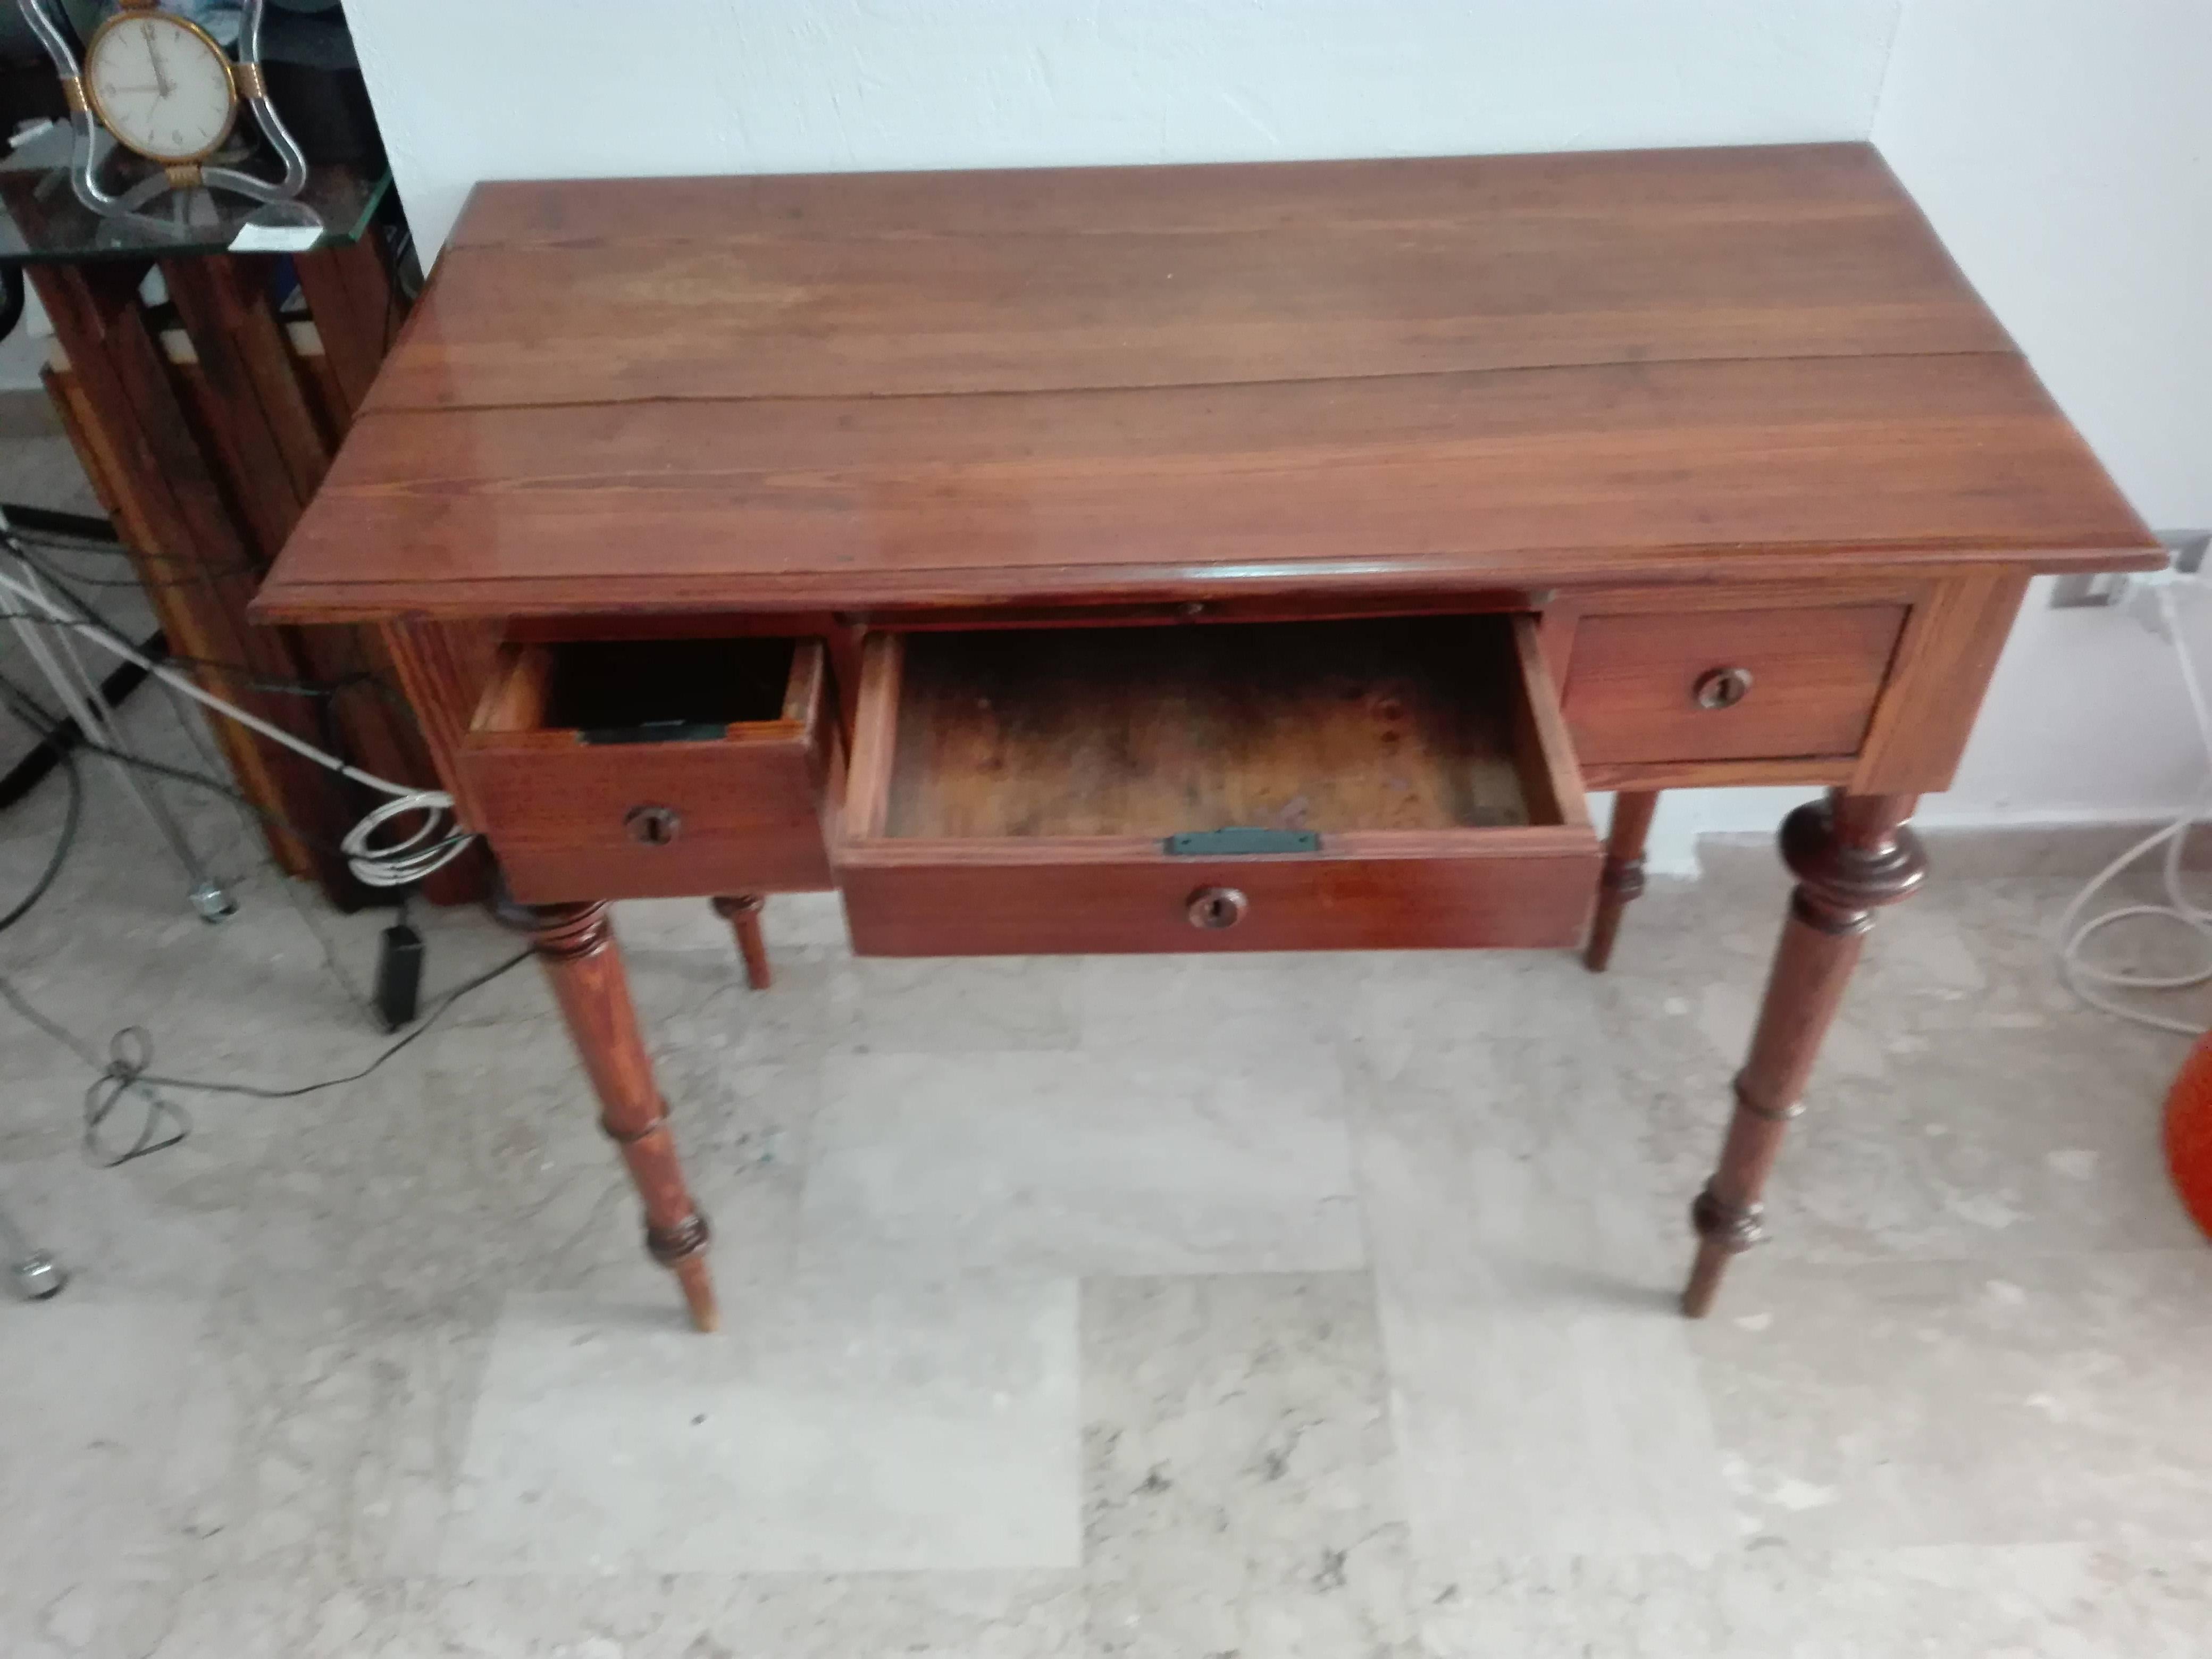 The writing desk and compound. The top with angled corners, long central drawer side with two drawers. Raised on legs. Condition: A bit of scratch and a chip at the top end.